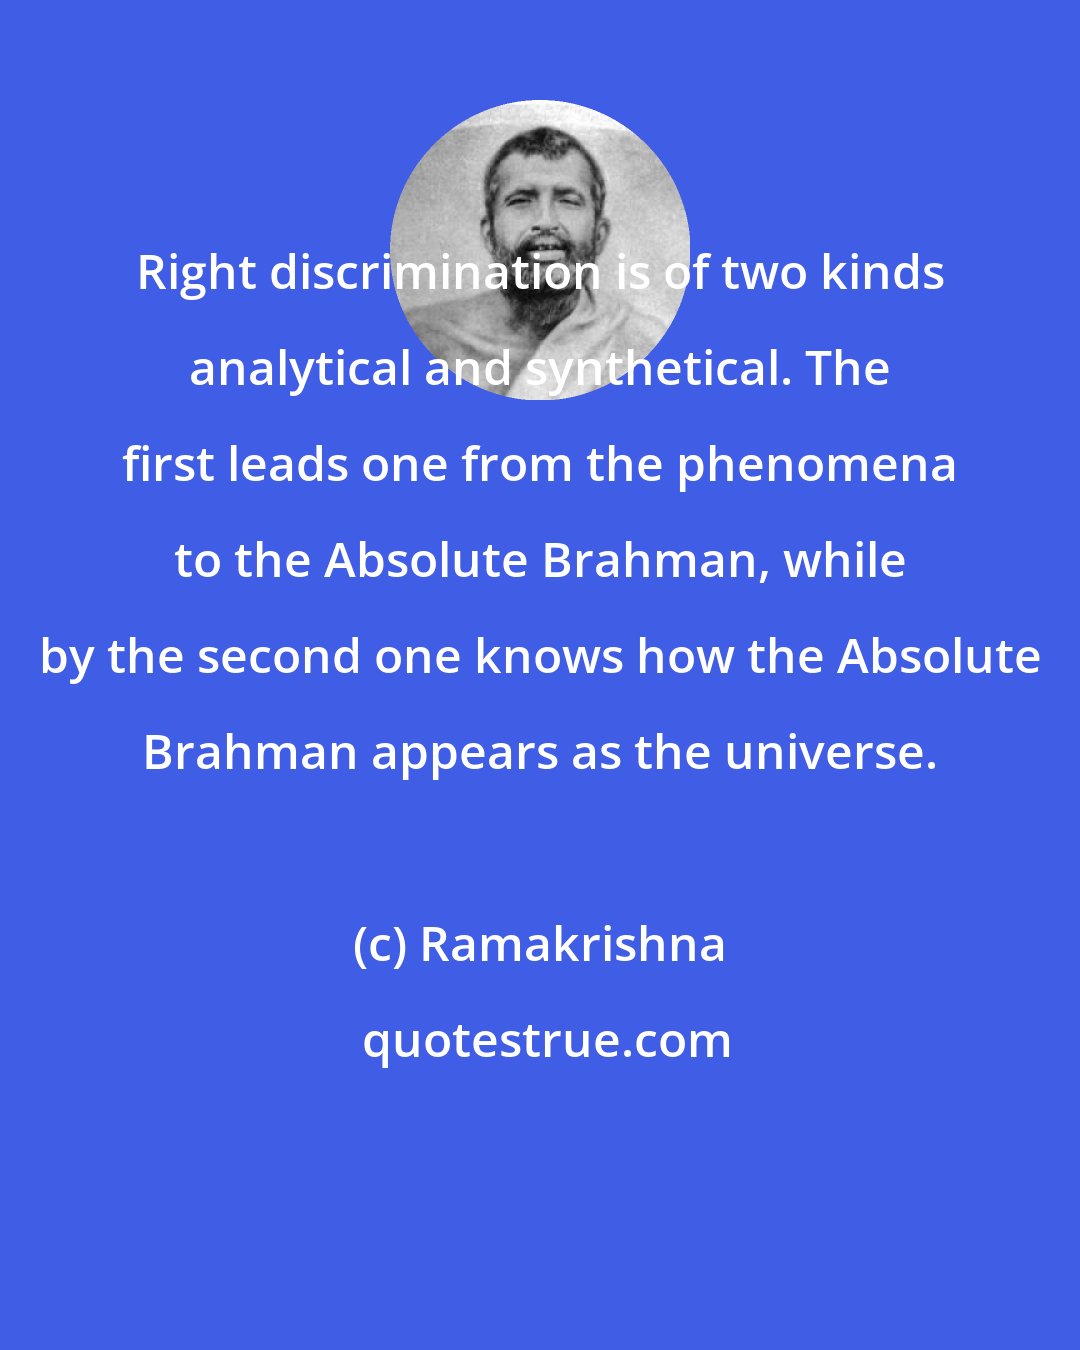 Ramakrishna: Right discrimination is of two kinds analytical and synthetical. The first leads one from the phenomena to the Absolute Brahman, while by the second one knows how the Absolute Brahman appears as the universe.